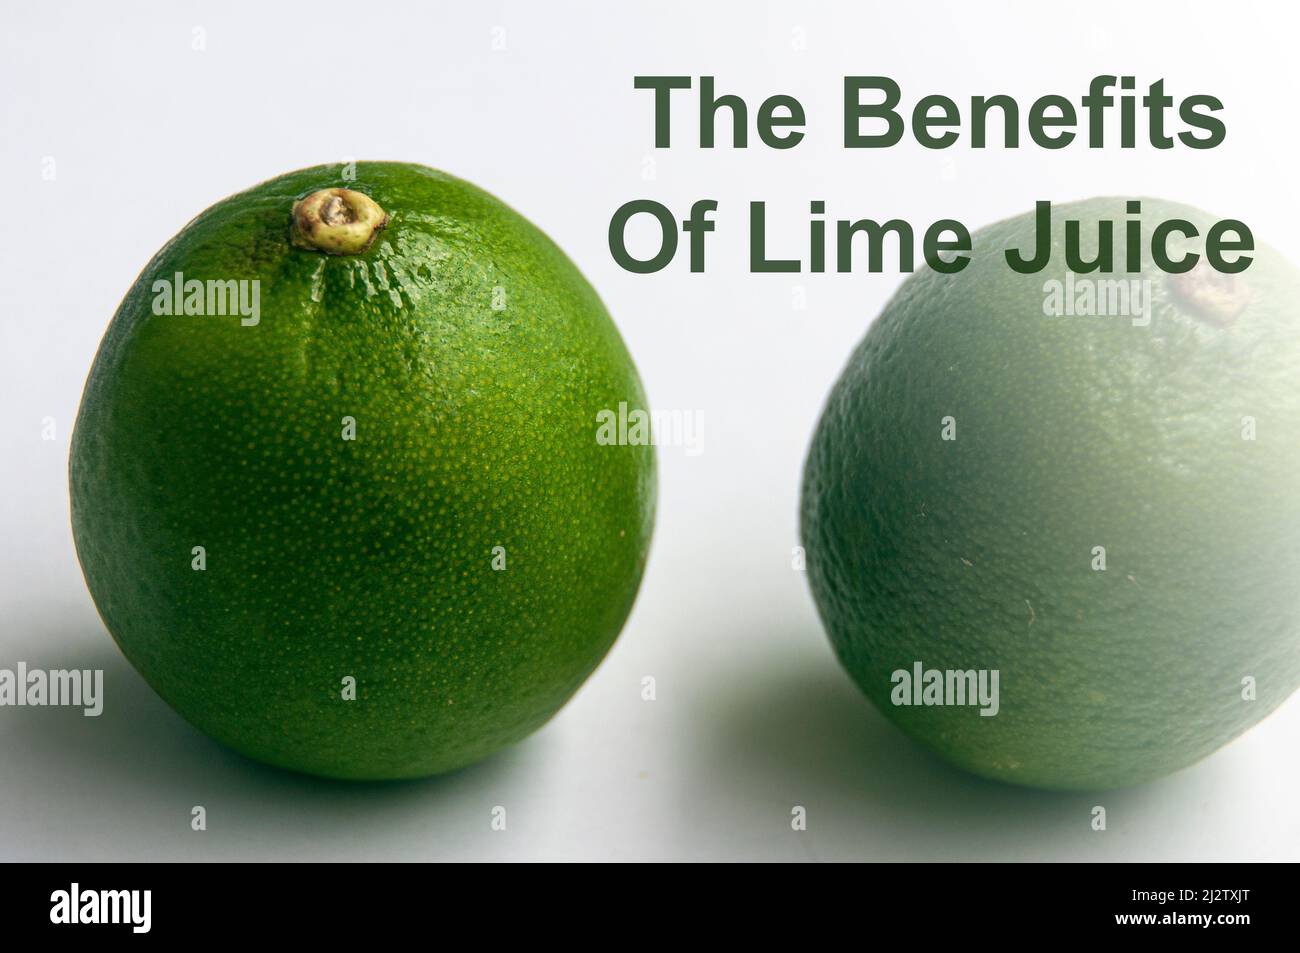 The benefits of lime juice text with limes background. Food concept Stock Photo